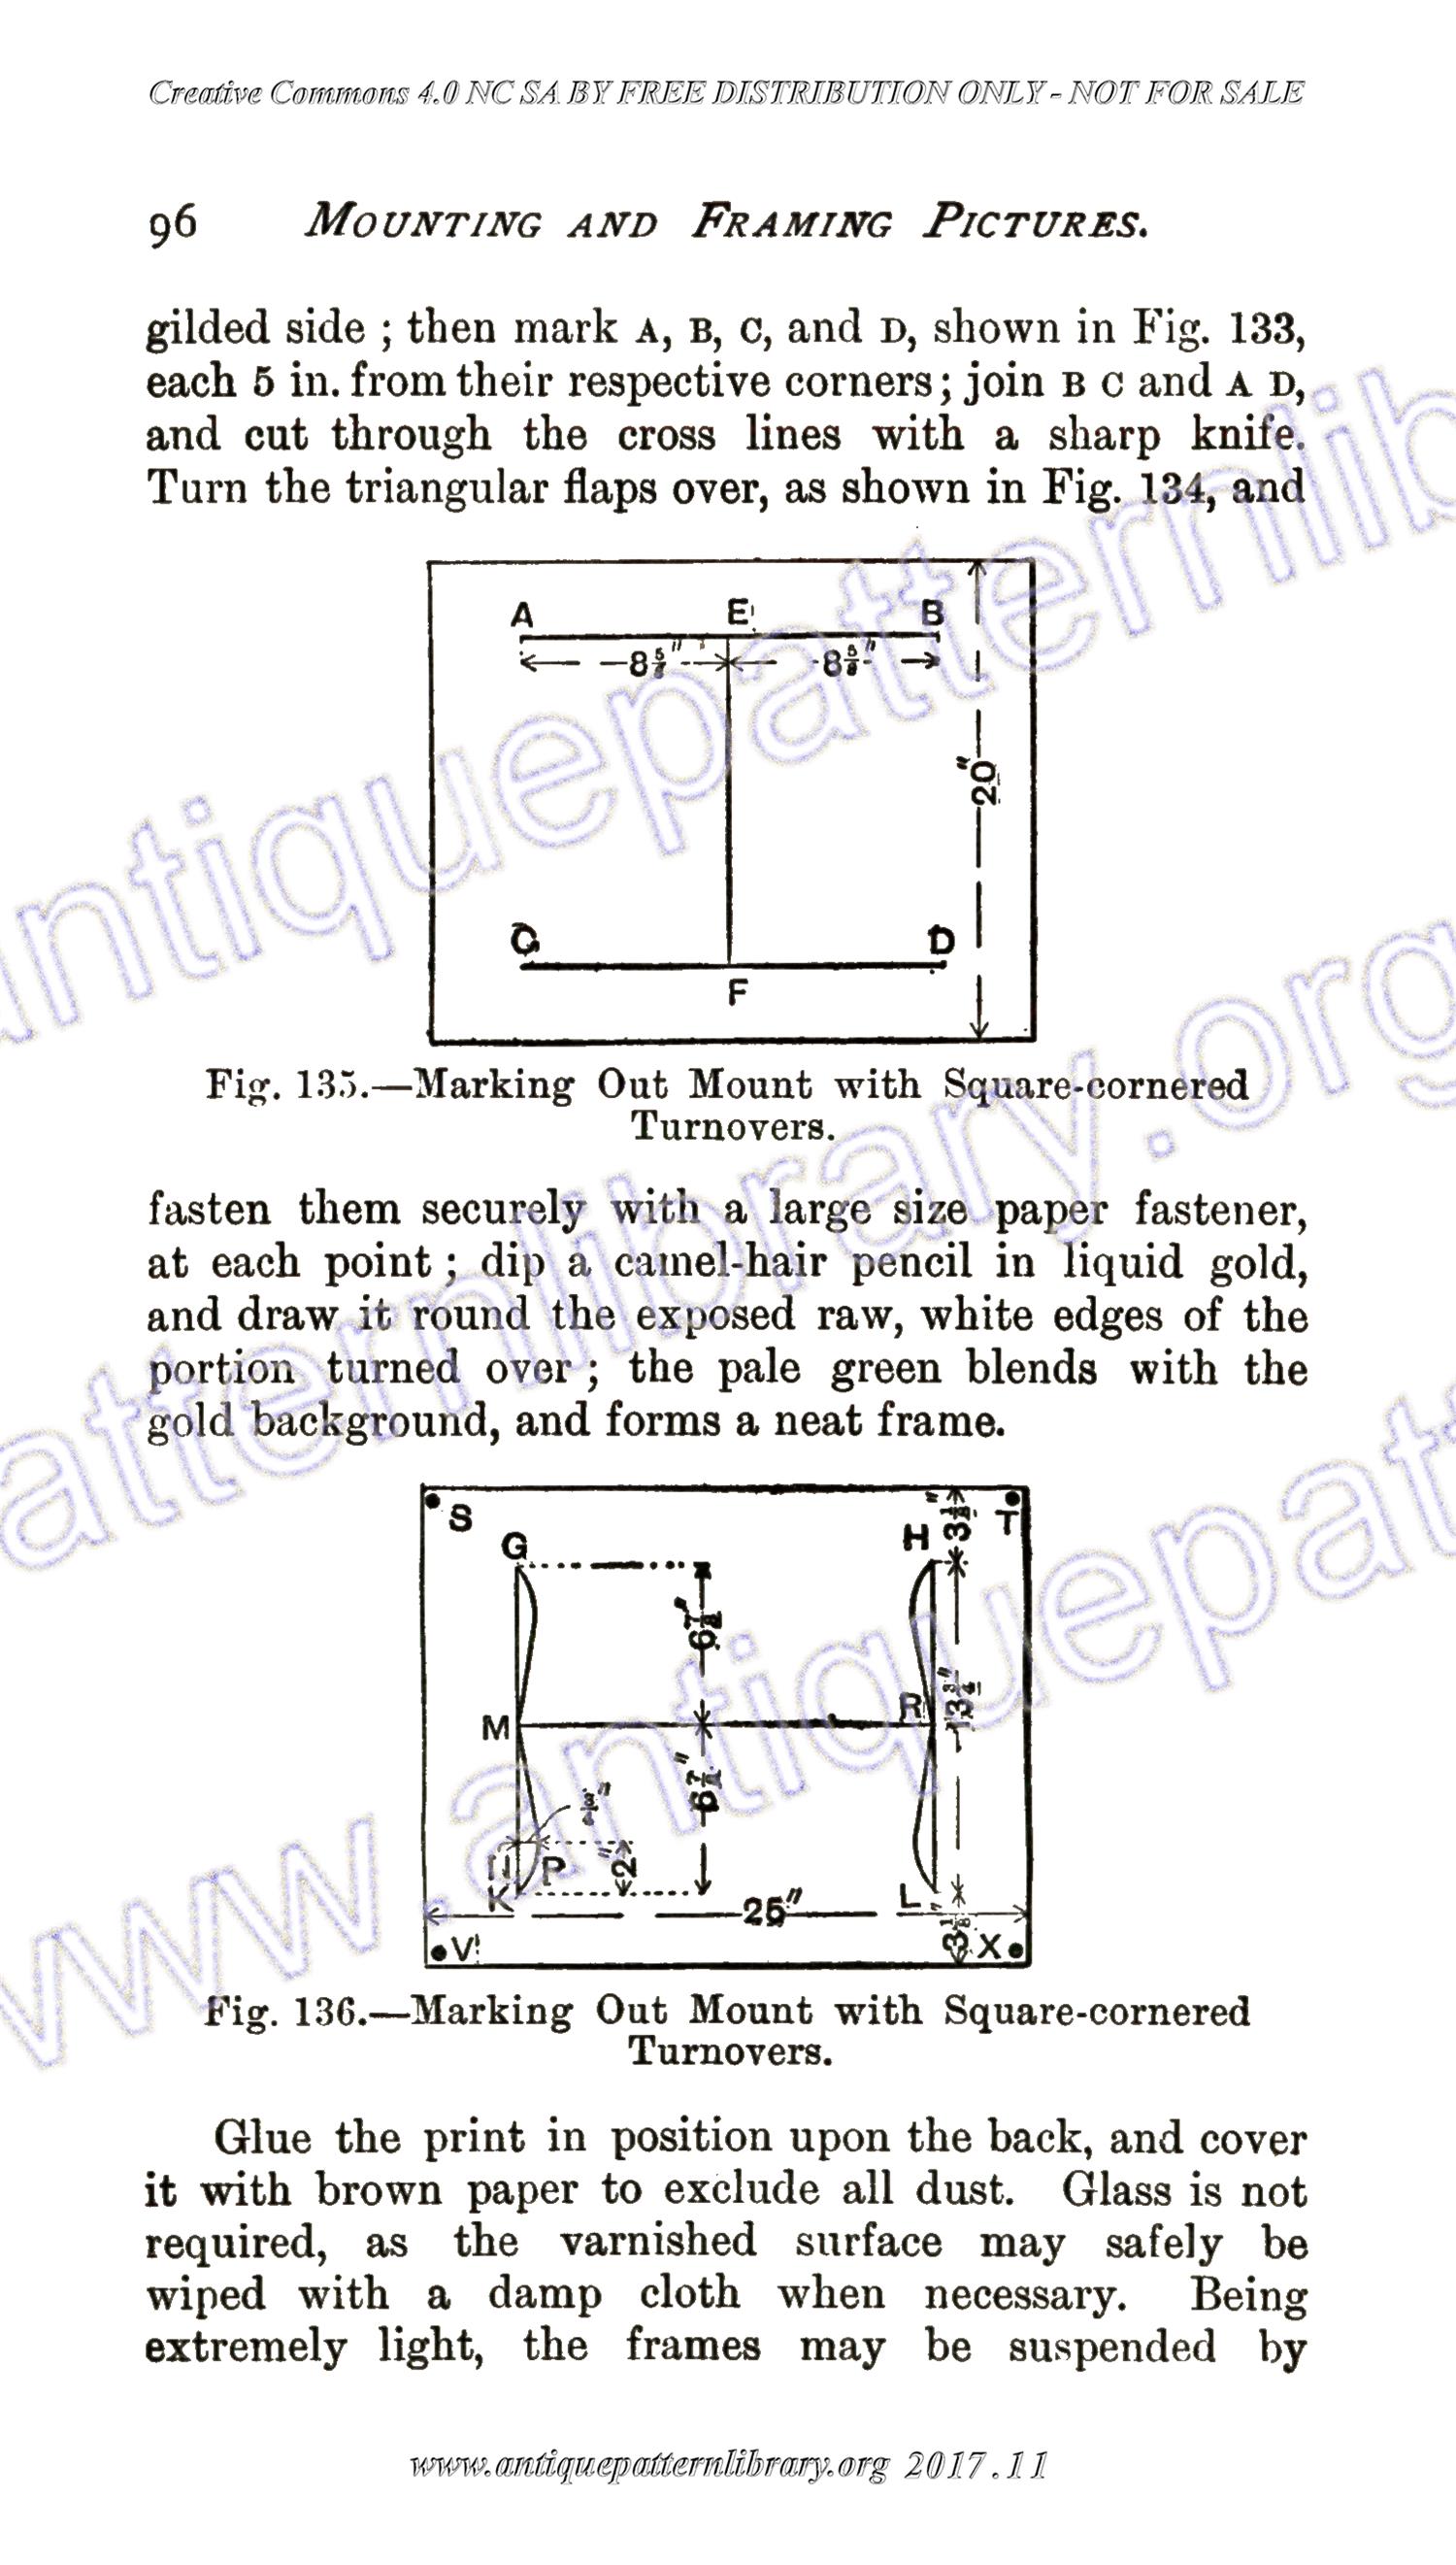 B-SW032 Mounting and Framing Pictures